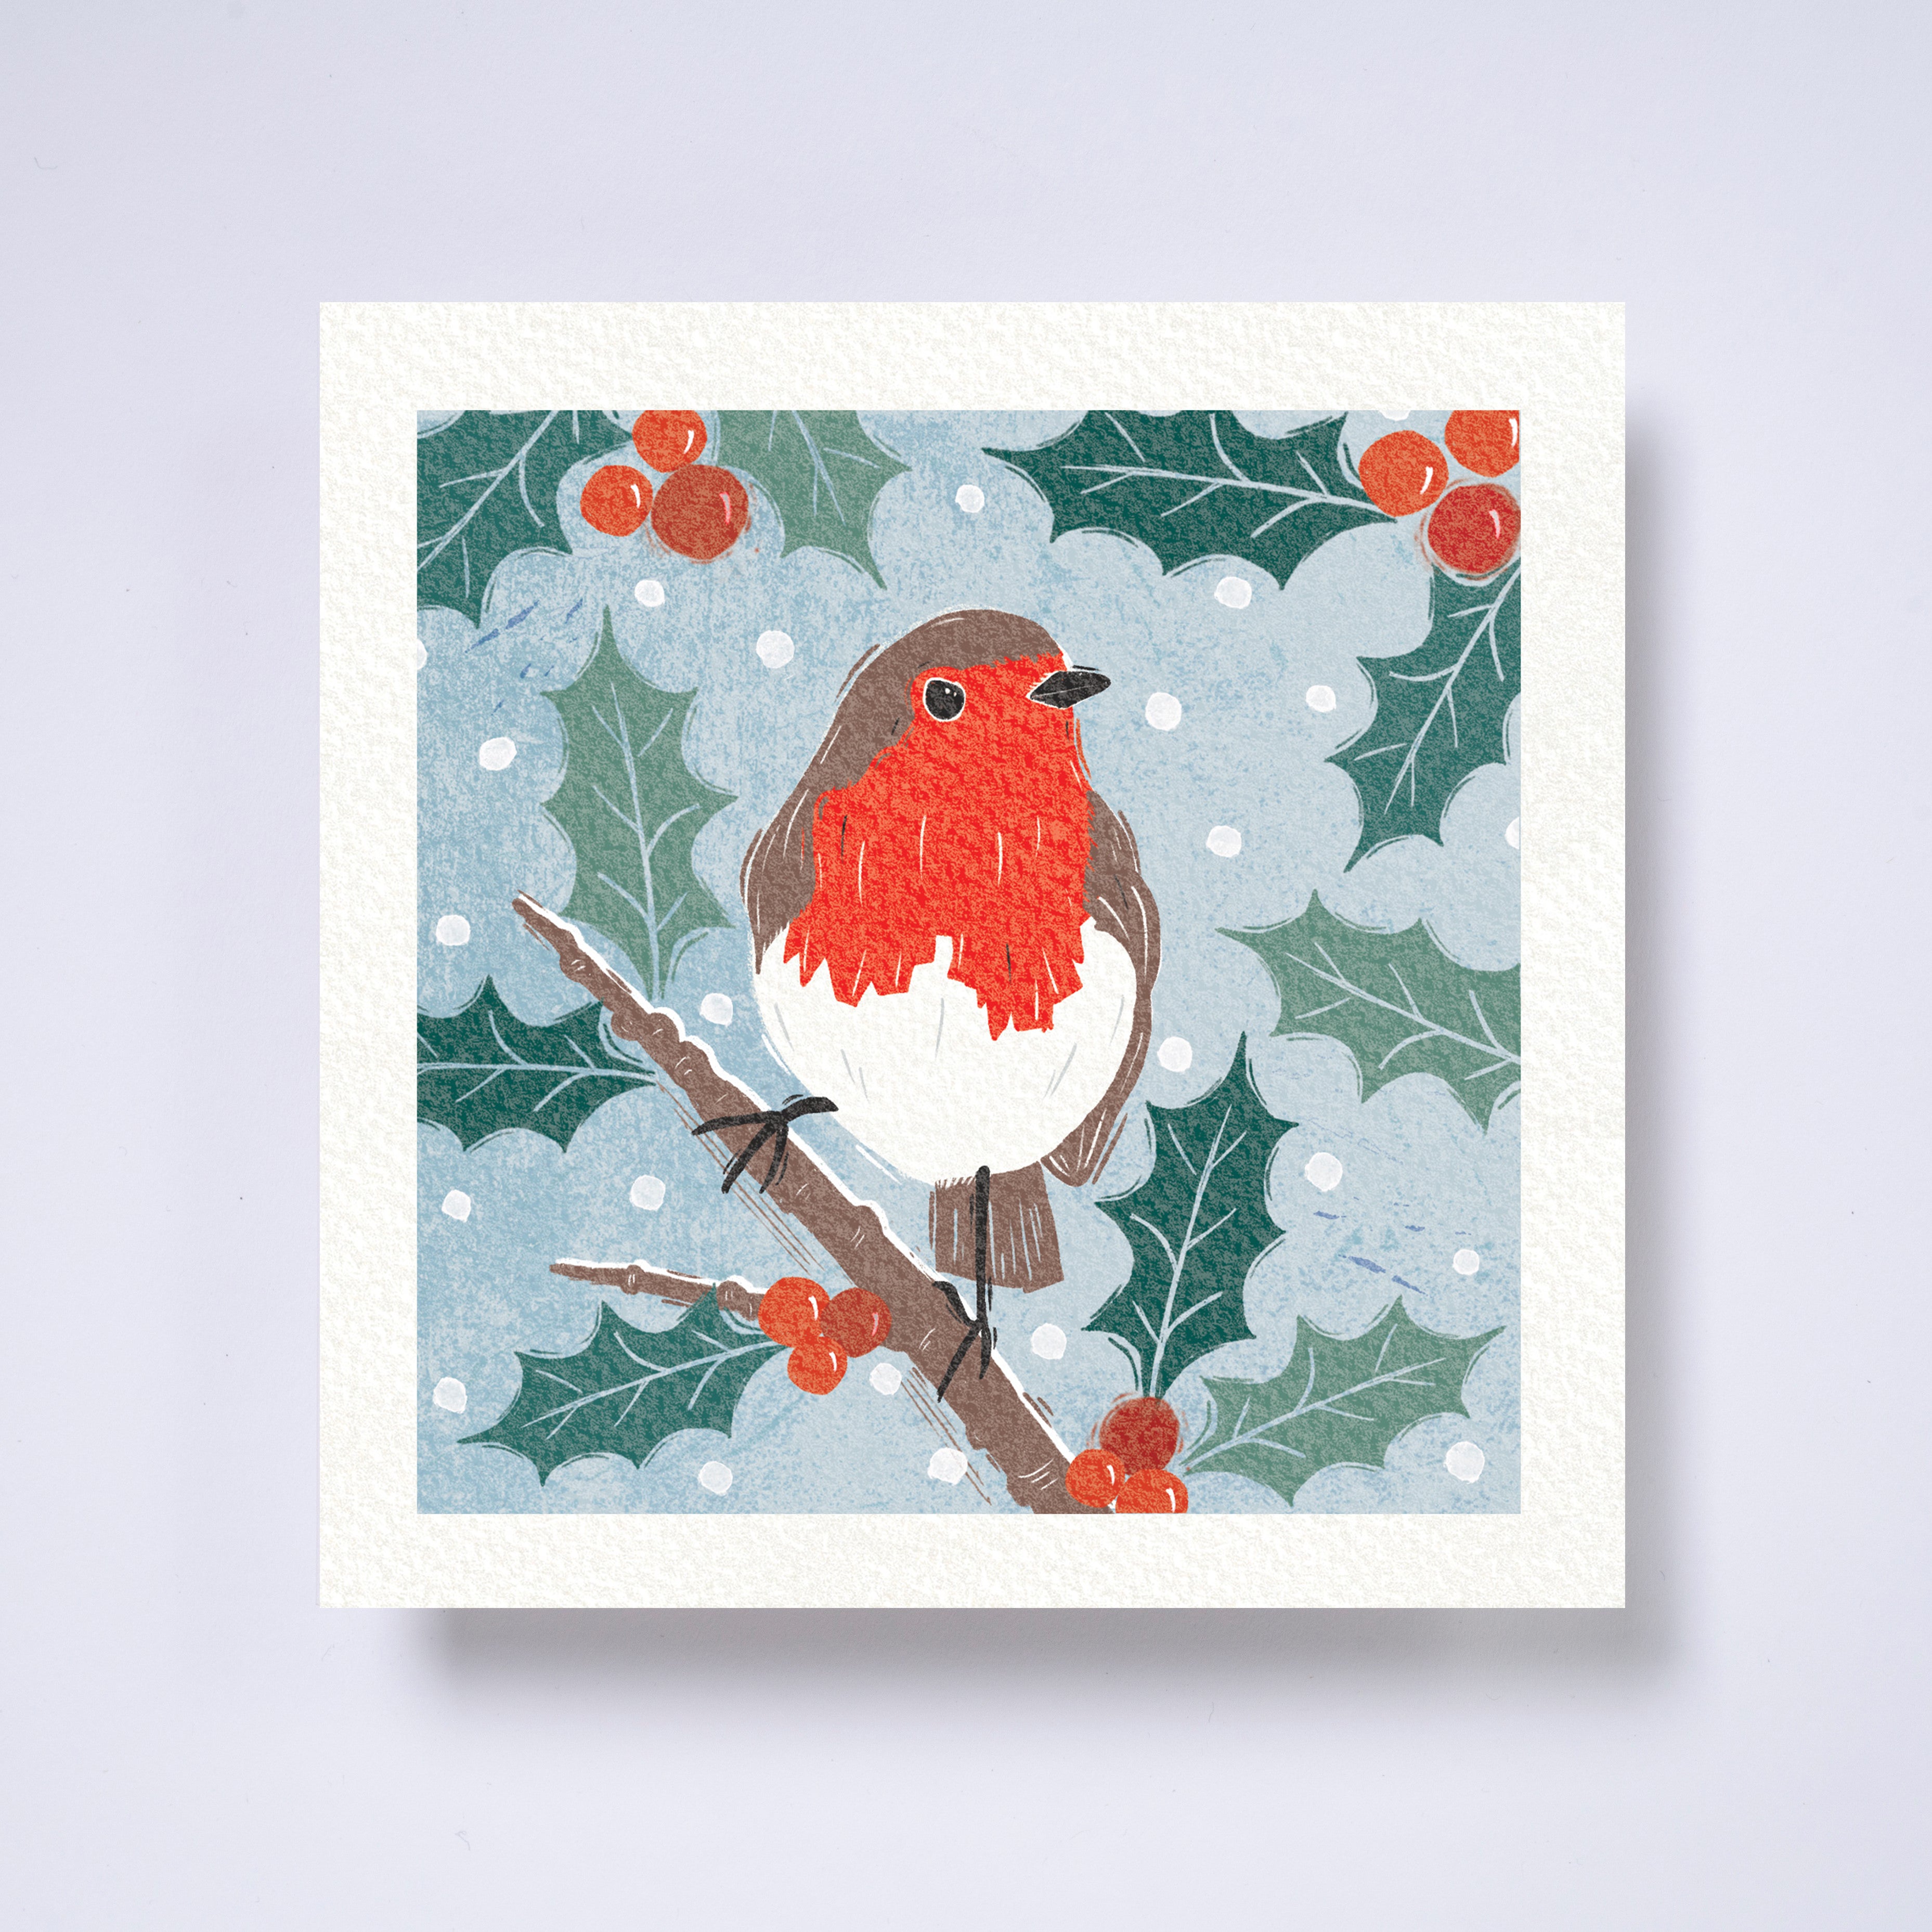 Robin redbreast - Welsh/English bilingual - pack of 10 charity Christmas cards with envelopes